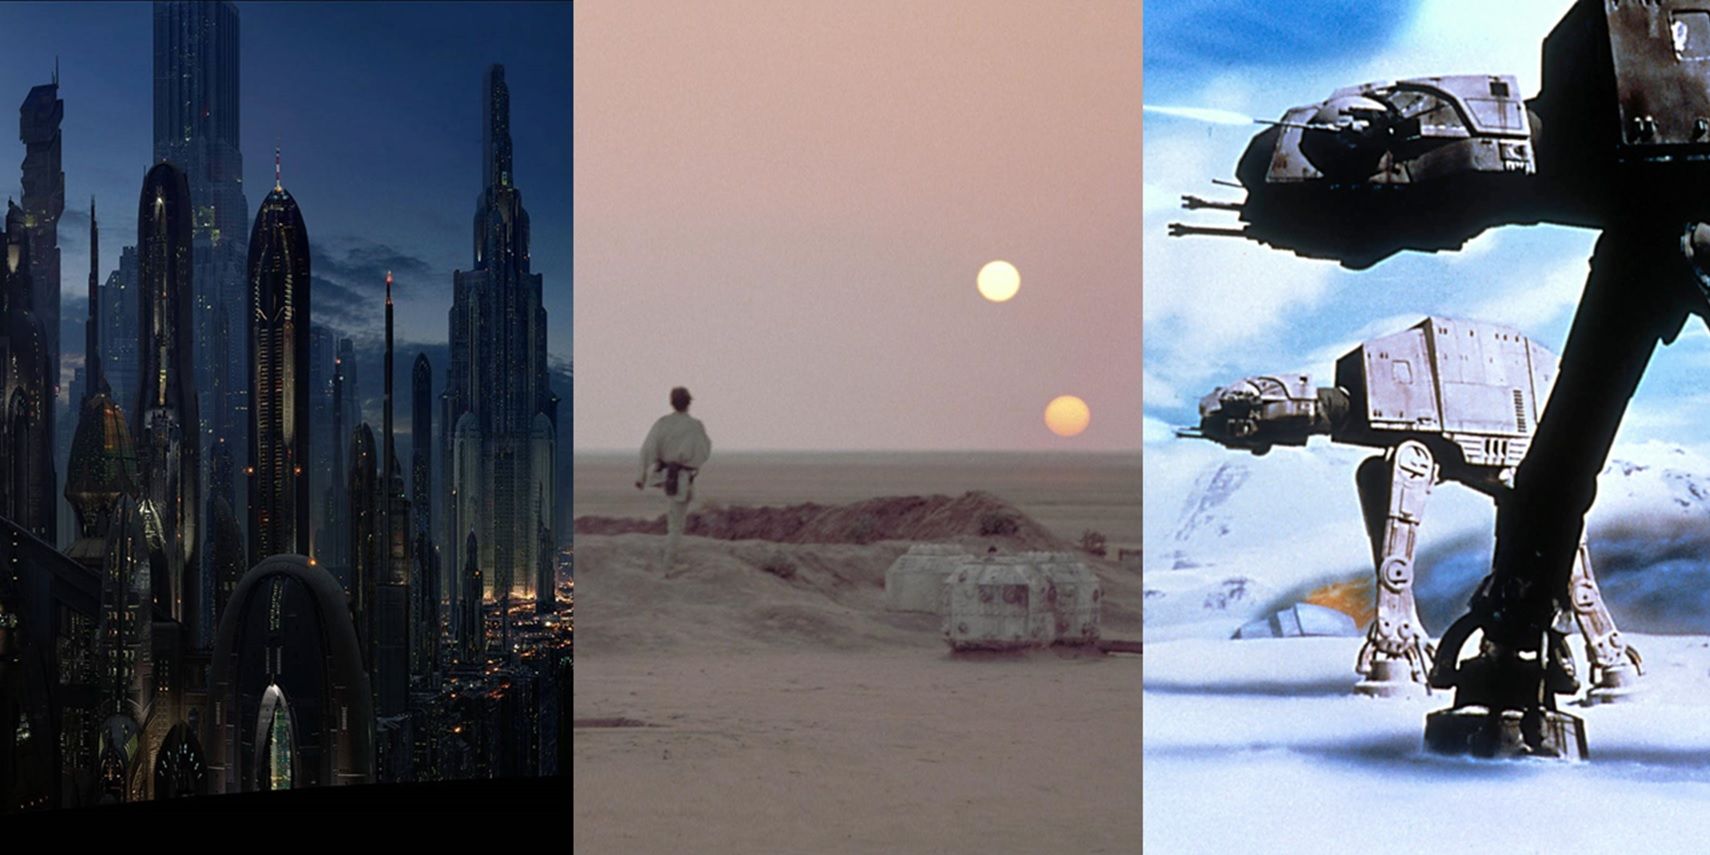 Split image of Coruscant, Tatooine, and Hoth from Star Wars